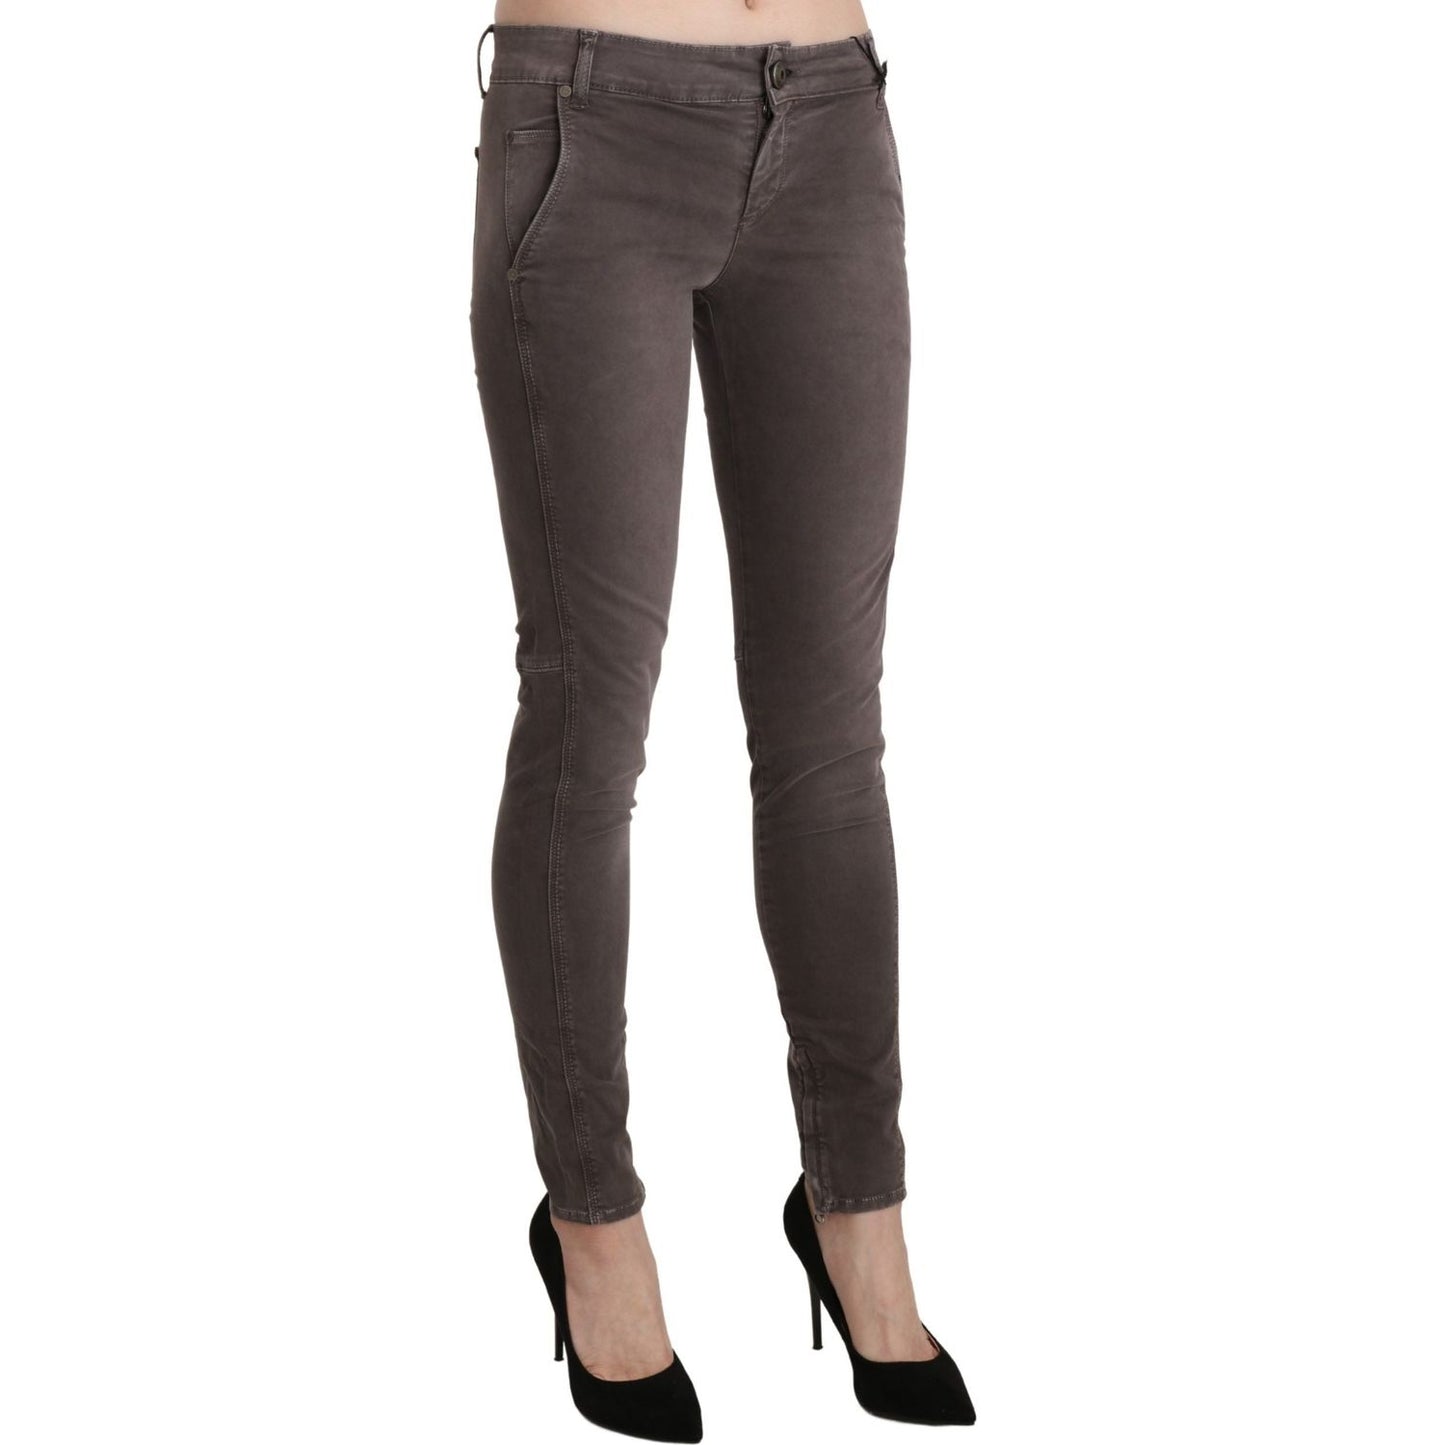 Ermanno Scervino Chic Brown Low Waist Skinny Trousers brown-low-waist-skinny-slim-trouser-cotton-jeans